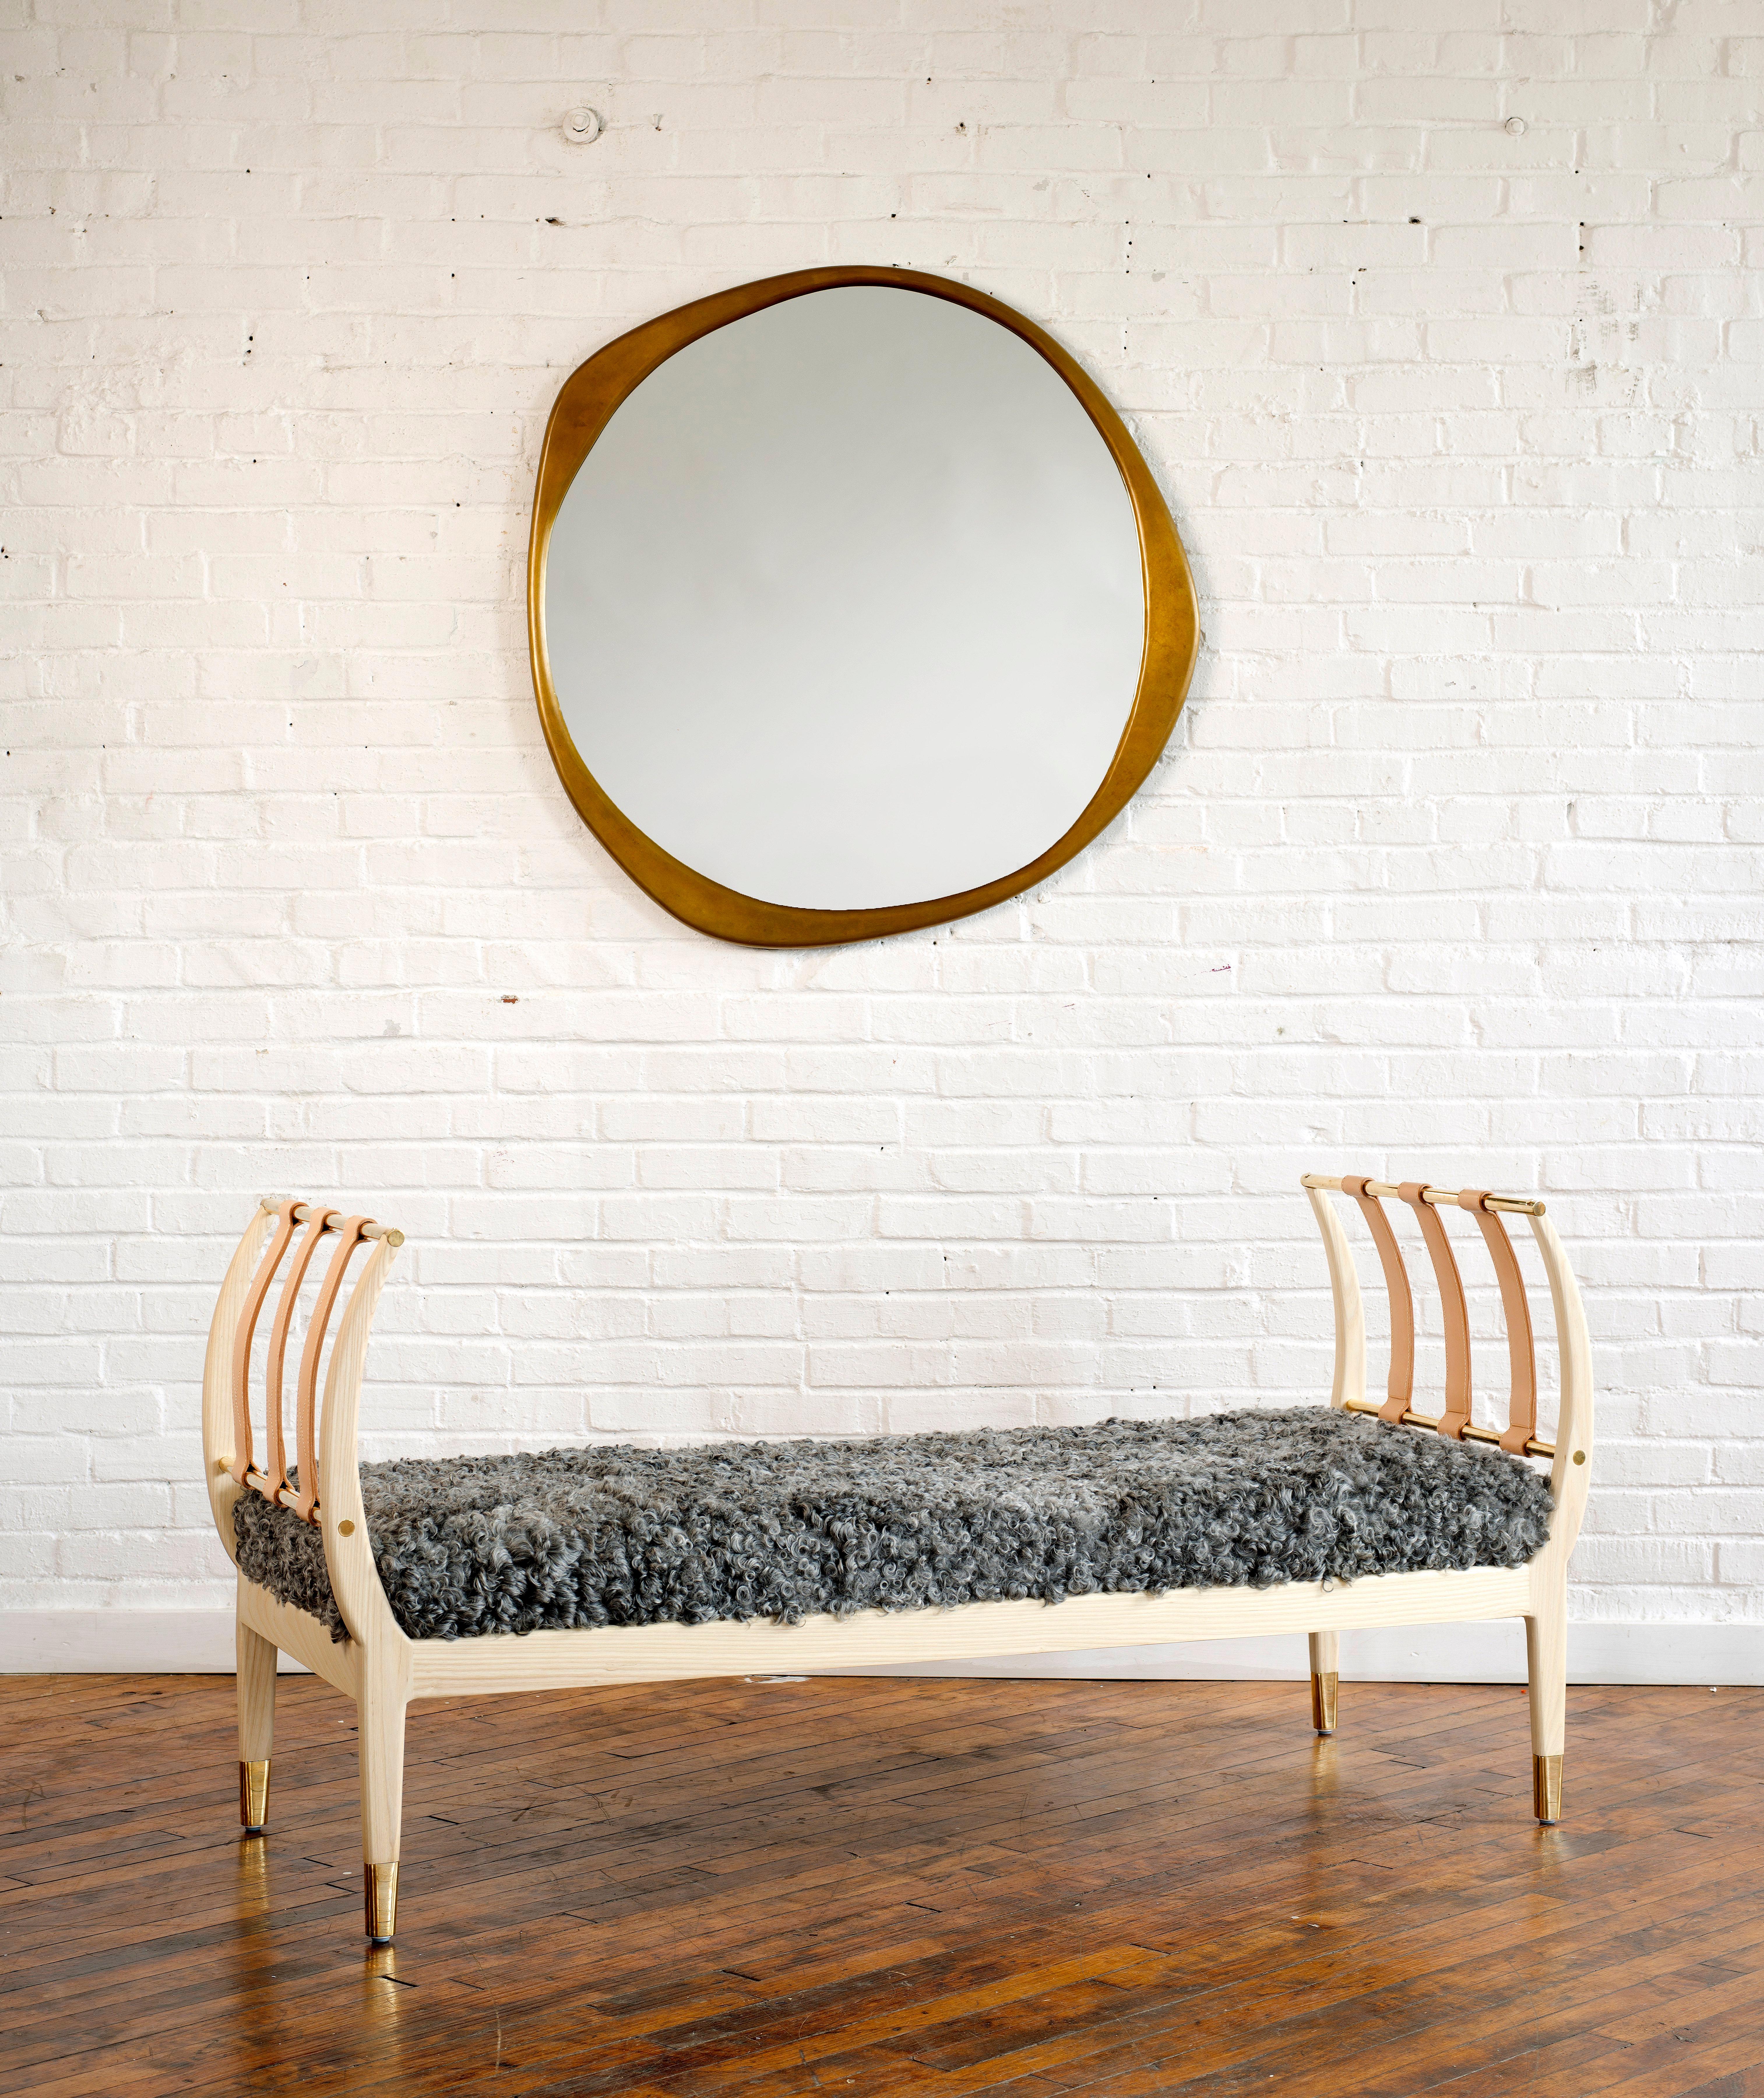 Inspired by the rib of a whale, our Rib Bench features curved lines that are graceful, solid and strong. The bench features solid brass rods and sabots, and is complemented by the arch of vegetable tanned leather straps. The leather straps are